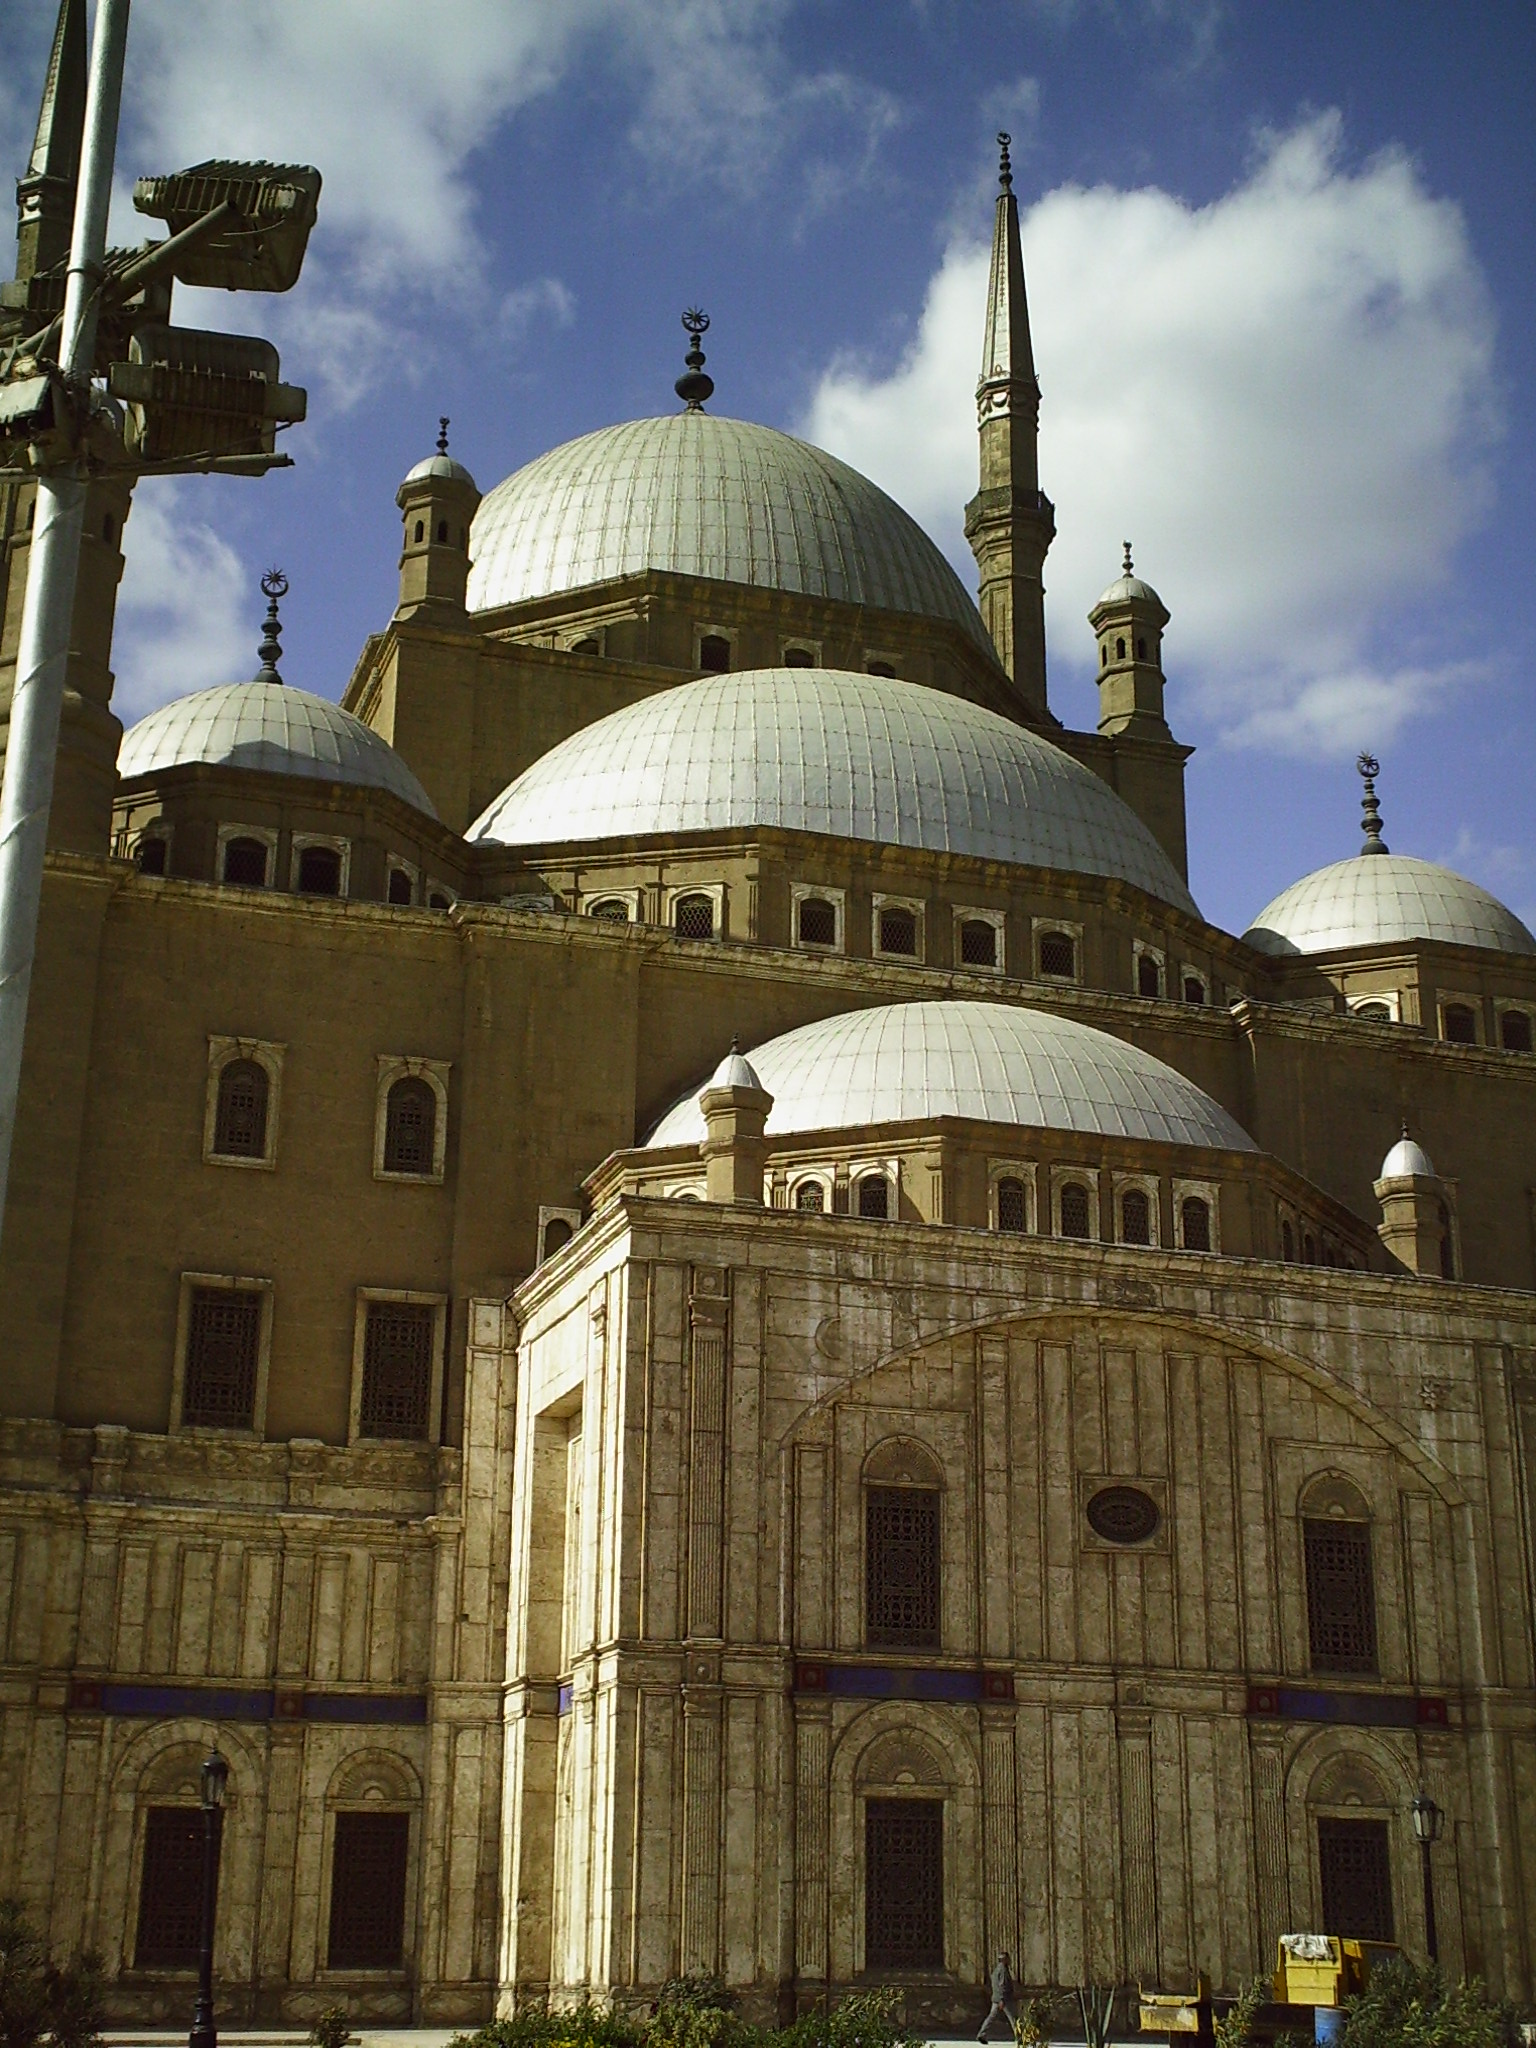  The Mohammed Ali Mosque, Cairo 